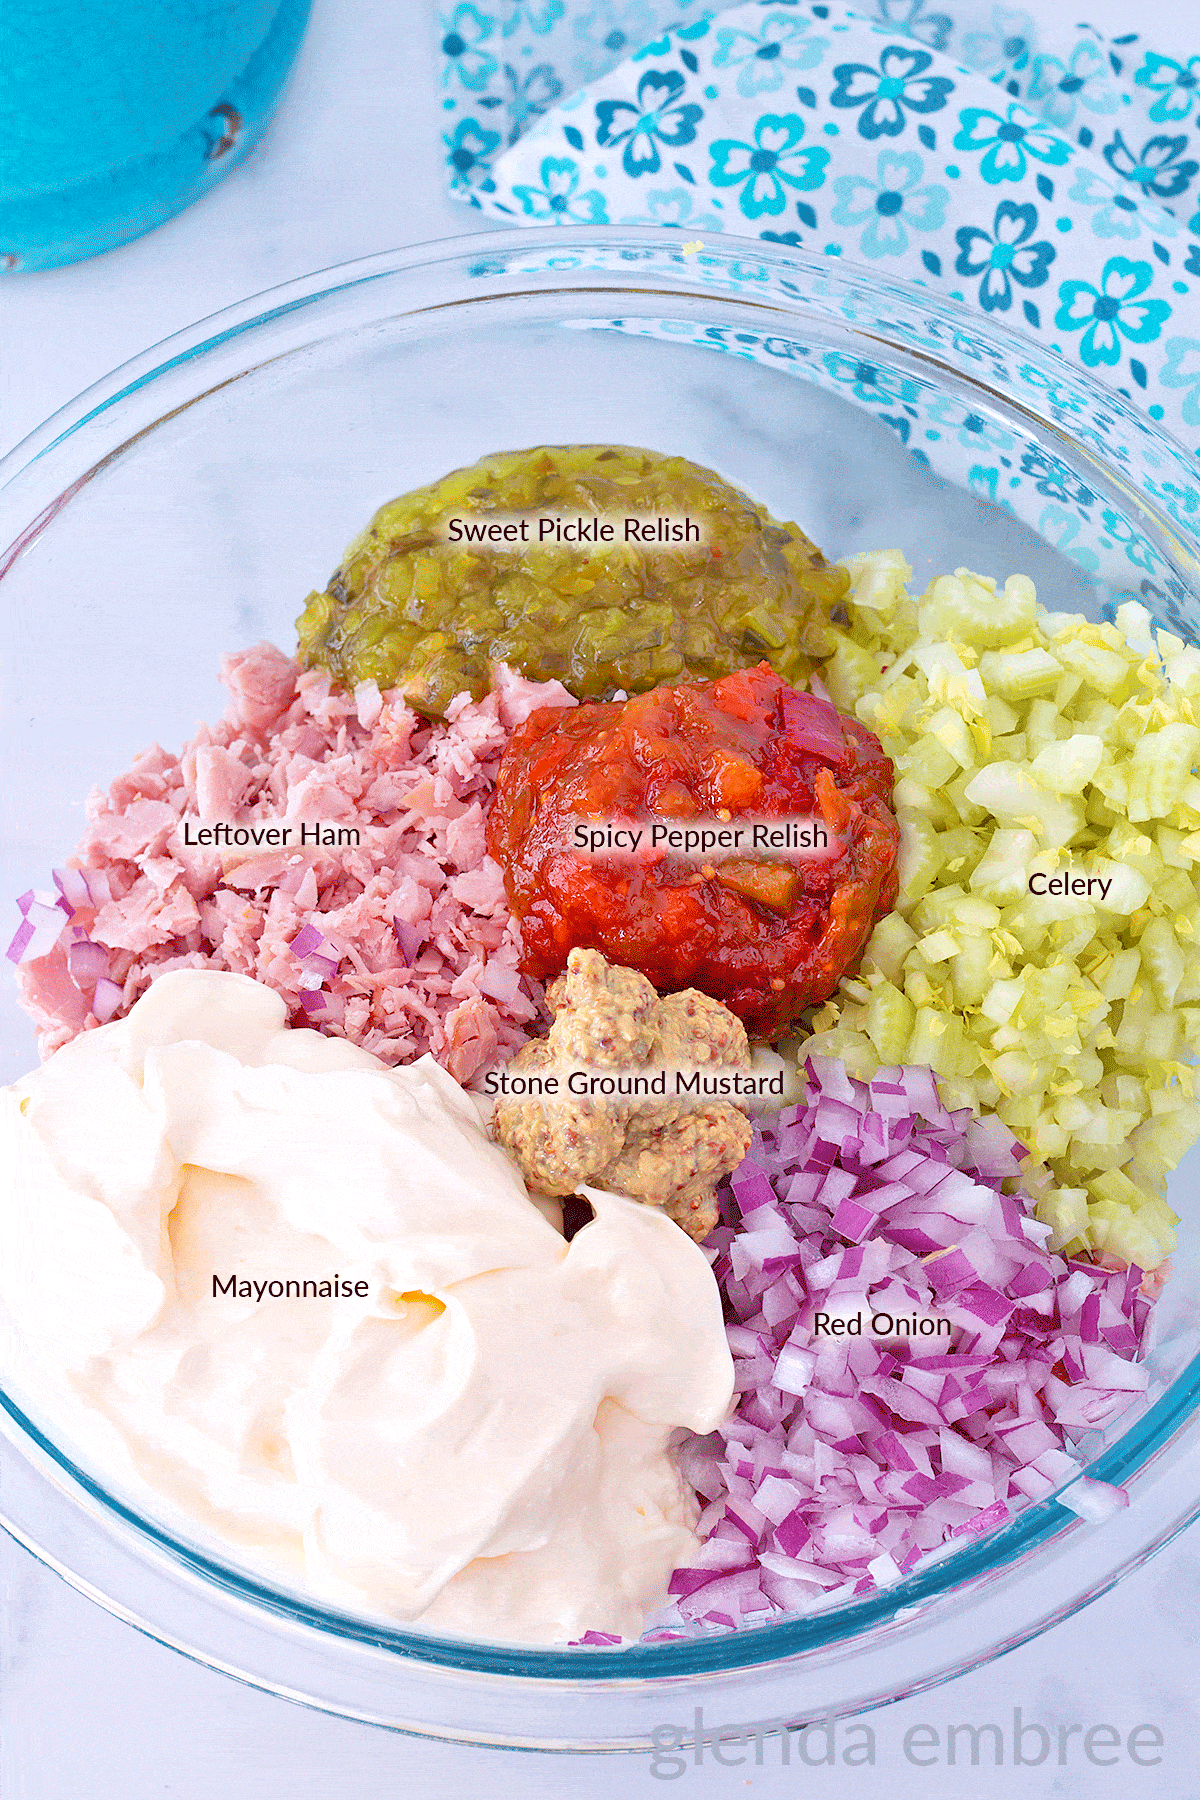 Ingredients for Old Fashioned Ham Salad (Deviled Ham) in a clear glass mixing bowl.  